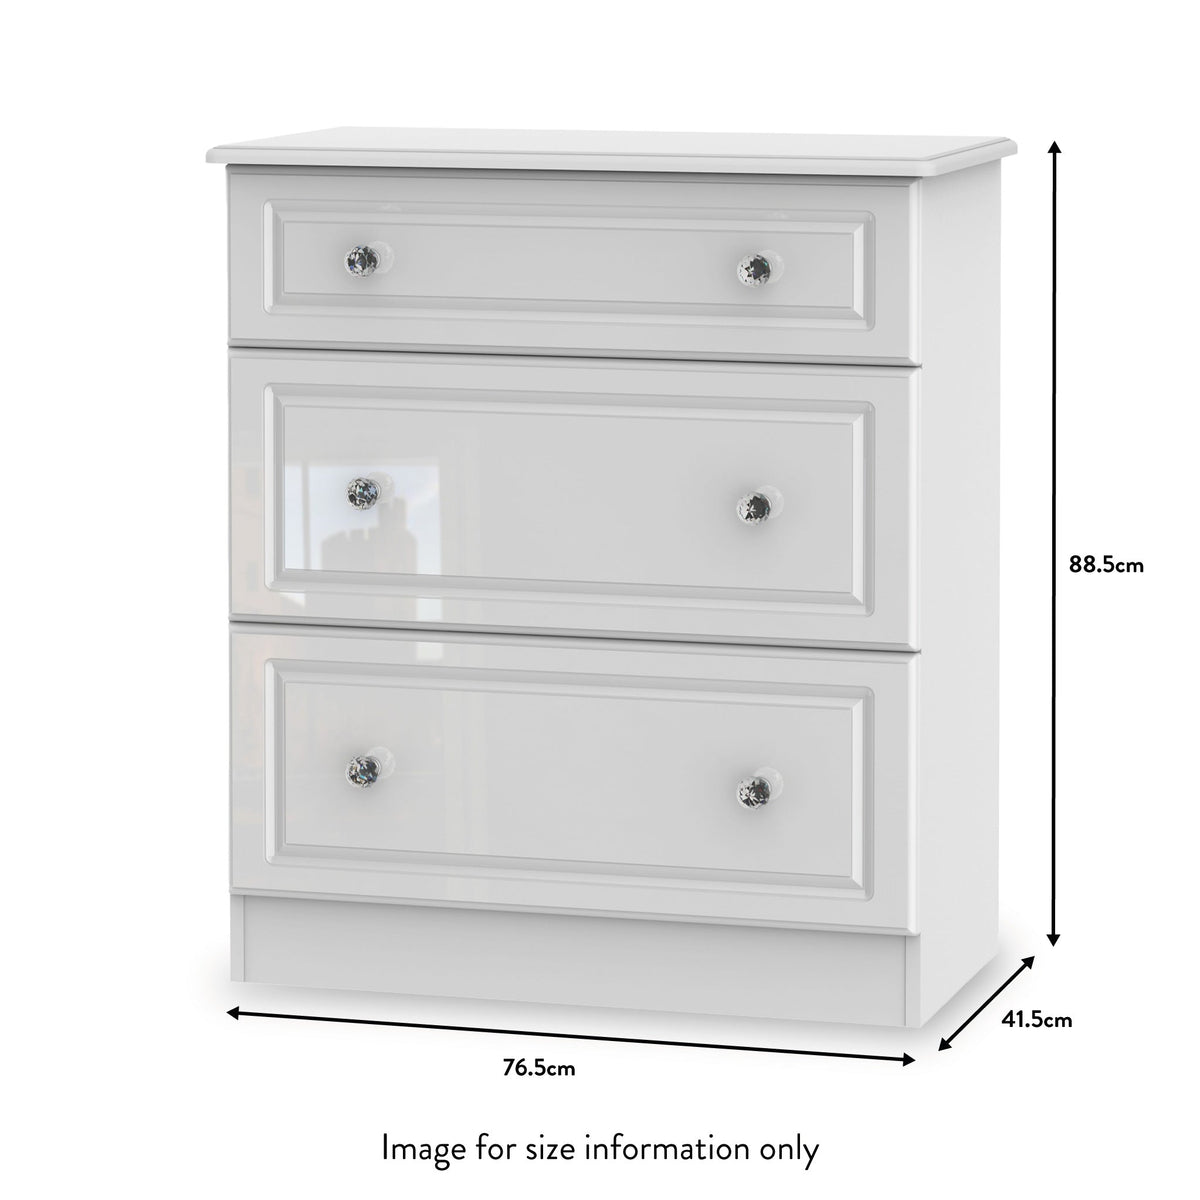 Kinsley White Gloss 3 Drawer Deep Chest from Roseland size